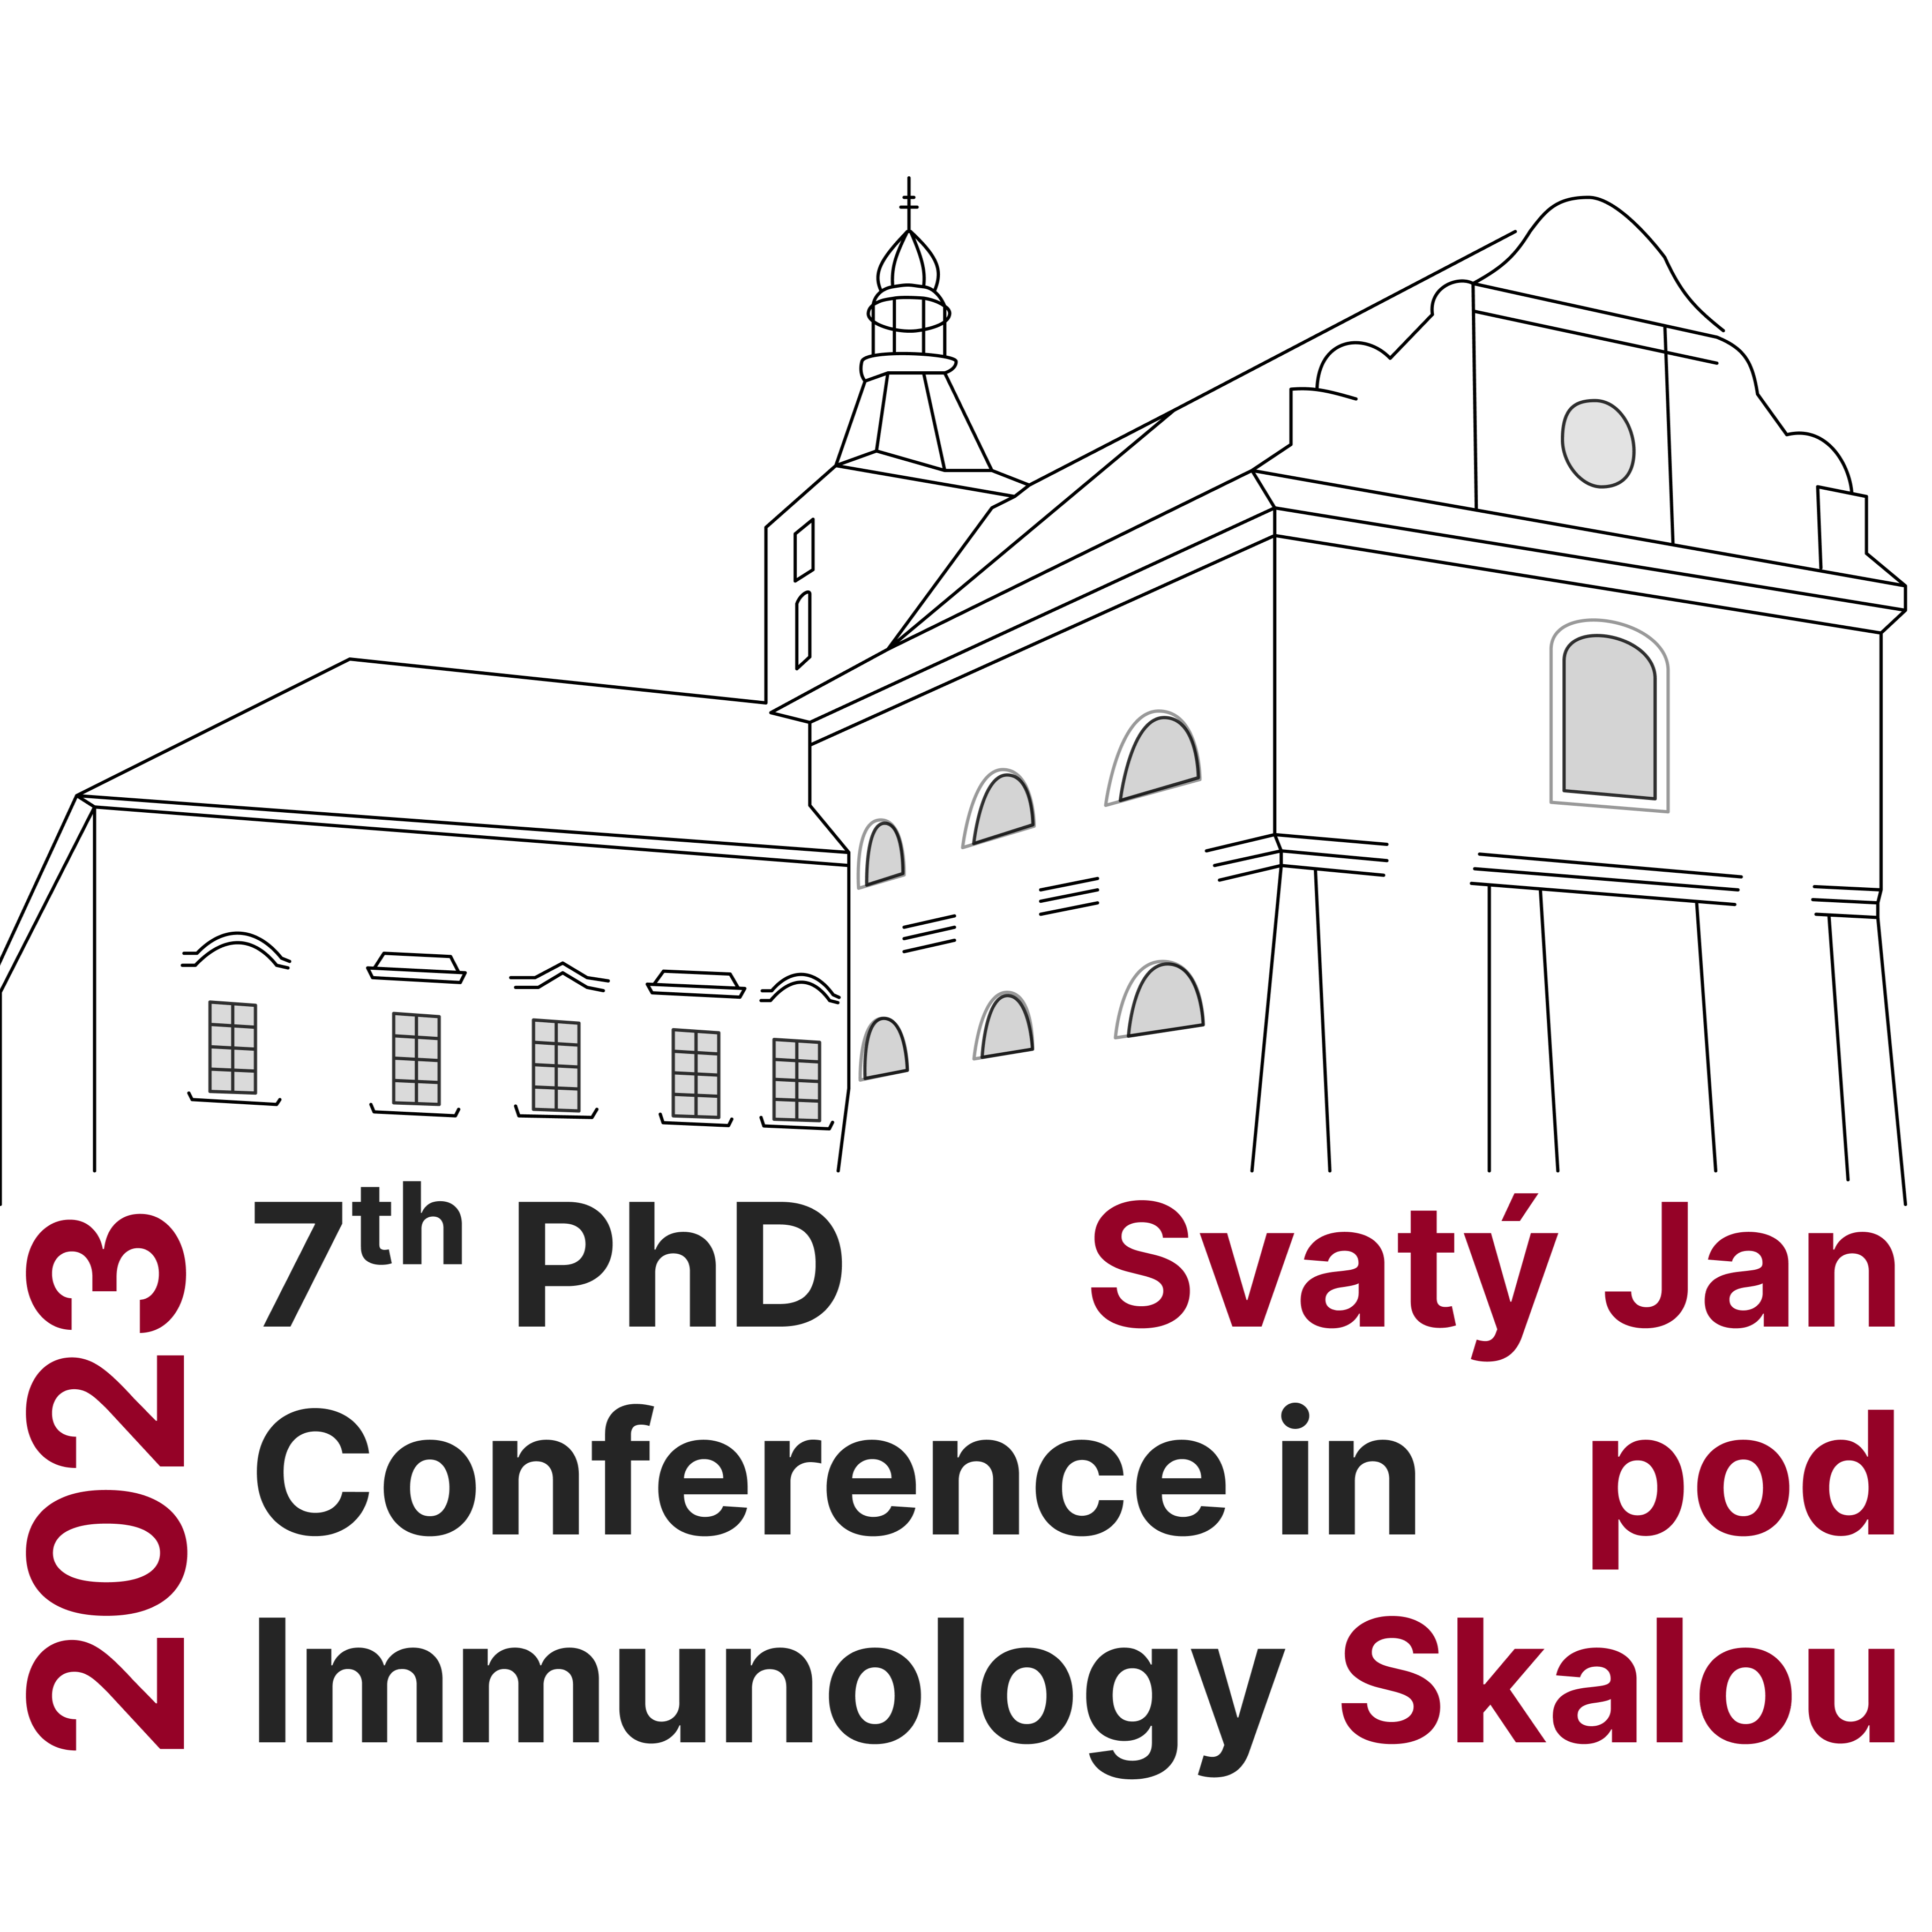 7th PhD Conference in Immunology